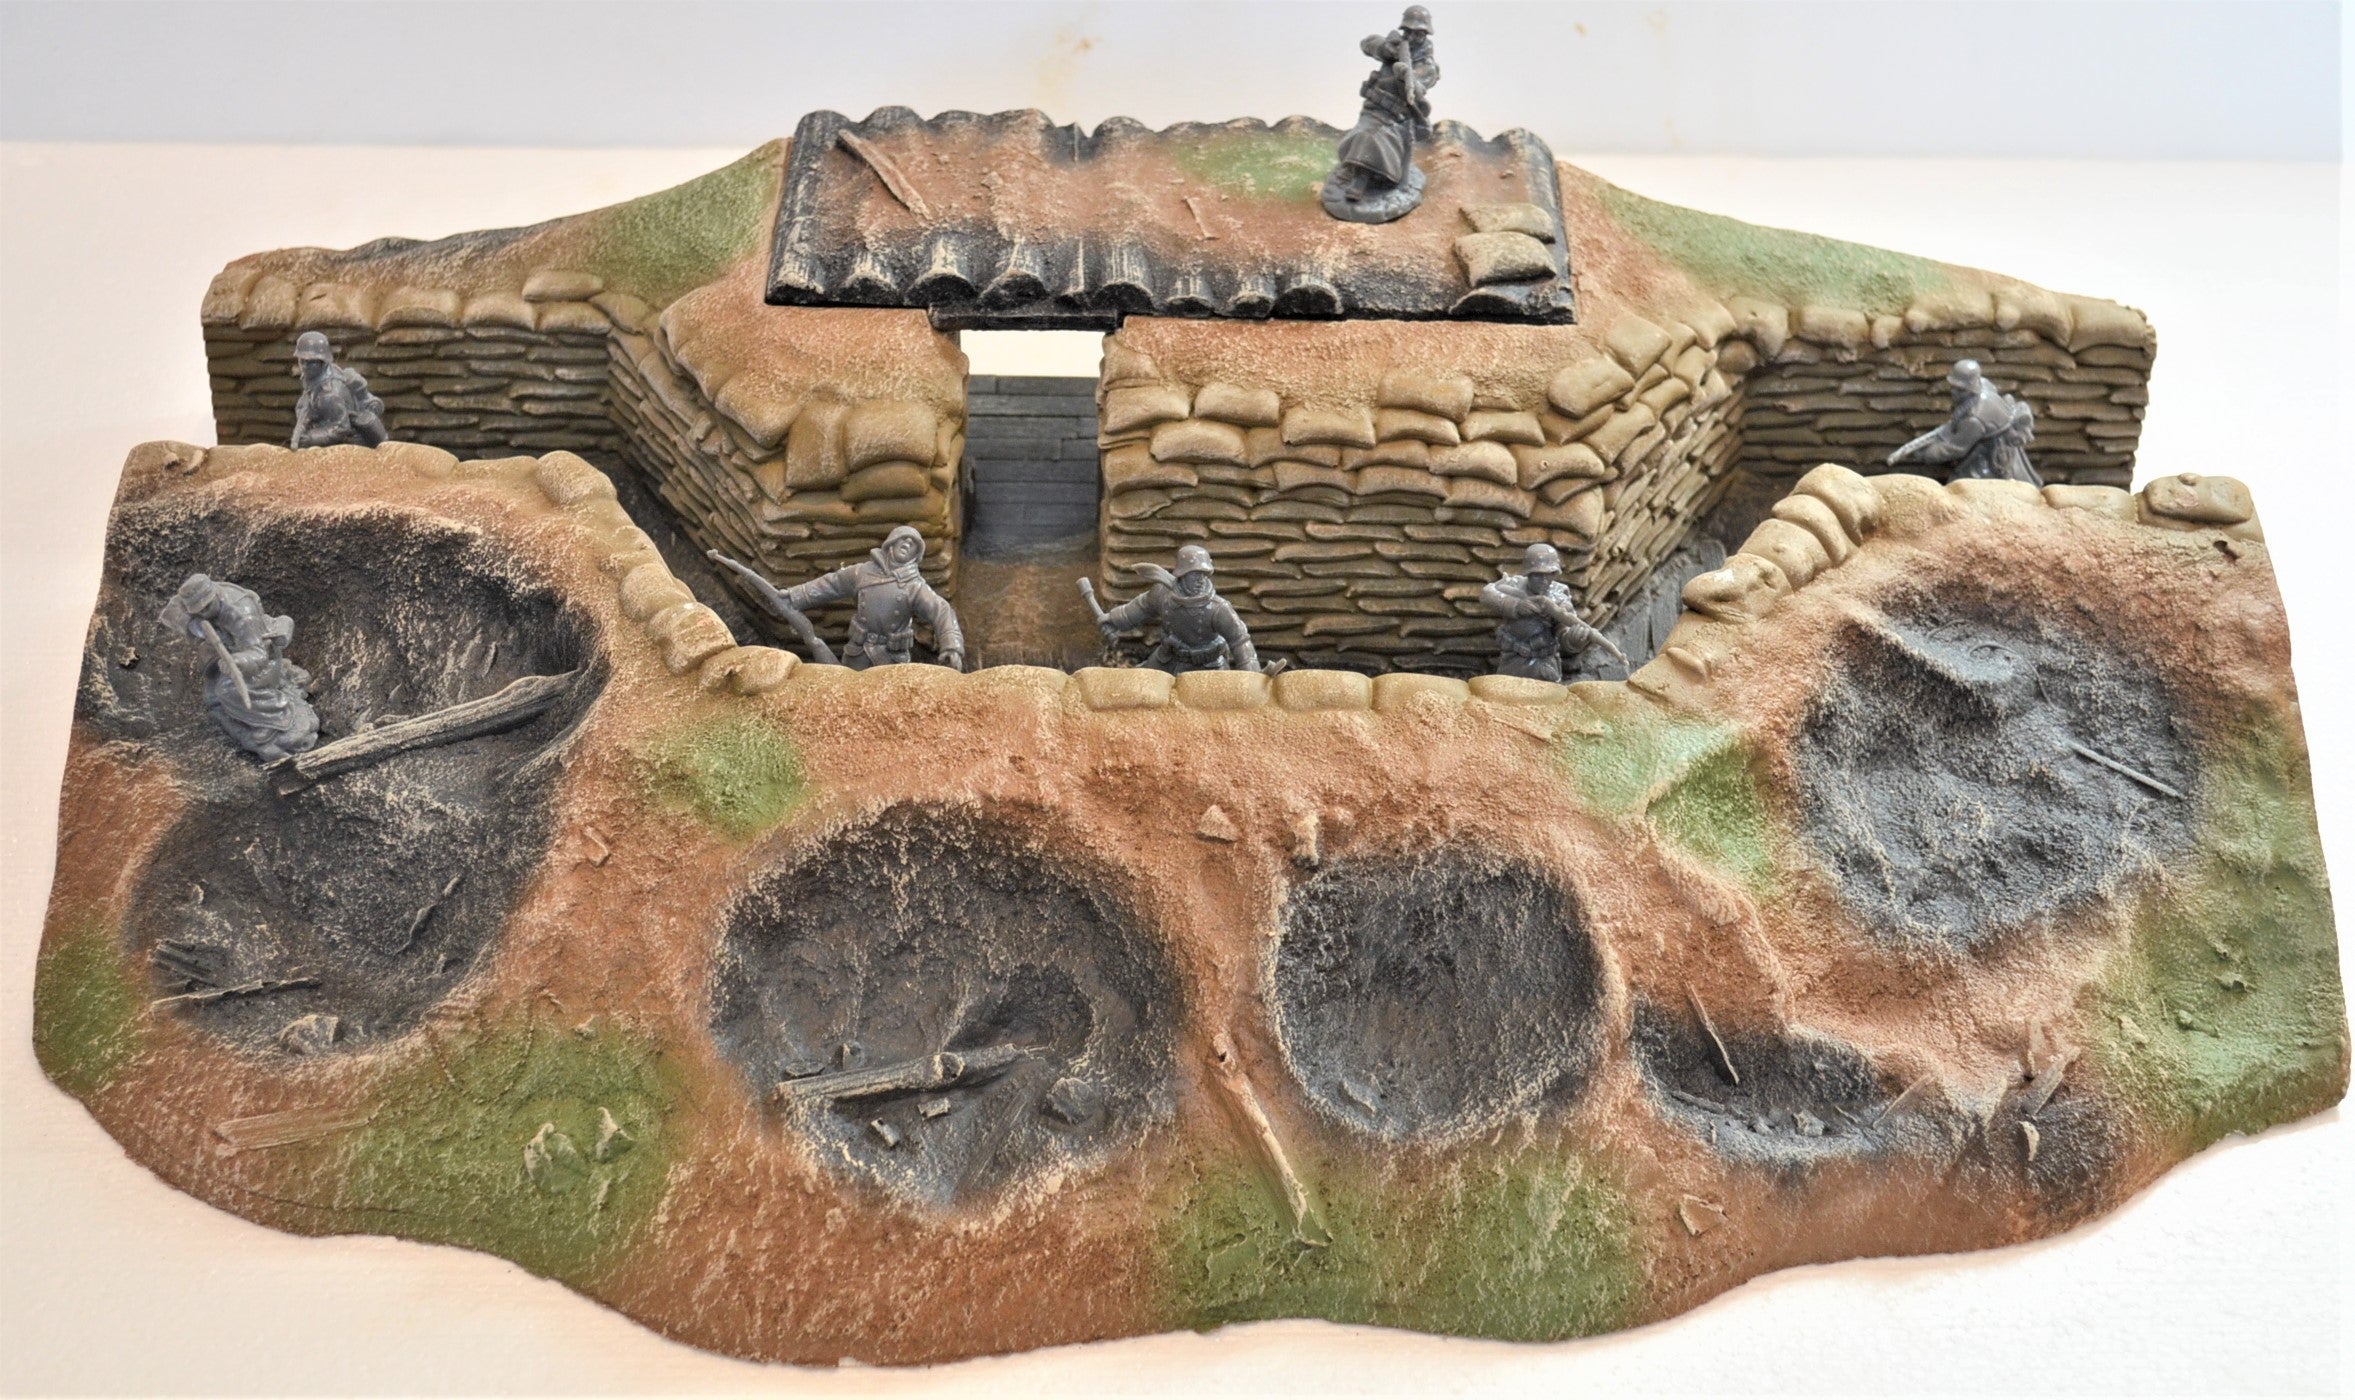 ATHERTON SCENICS PAINTED WWII WWI TRENCH CENTER INTERIOR COMMAND BUNKER - 9604